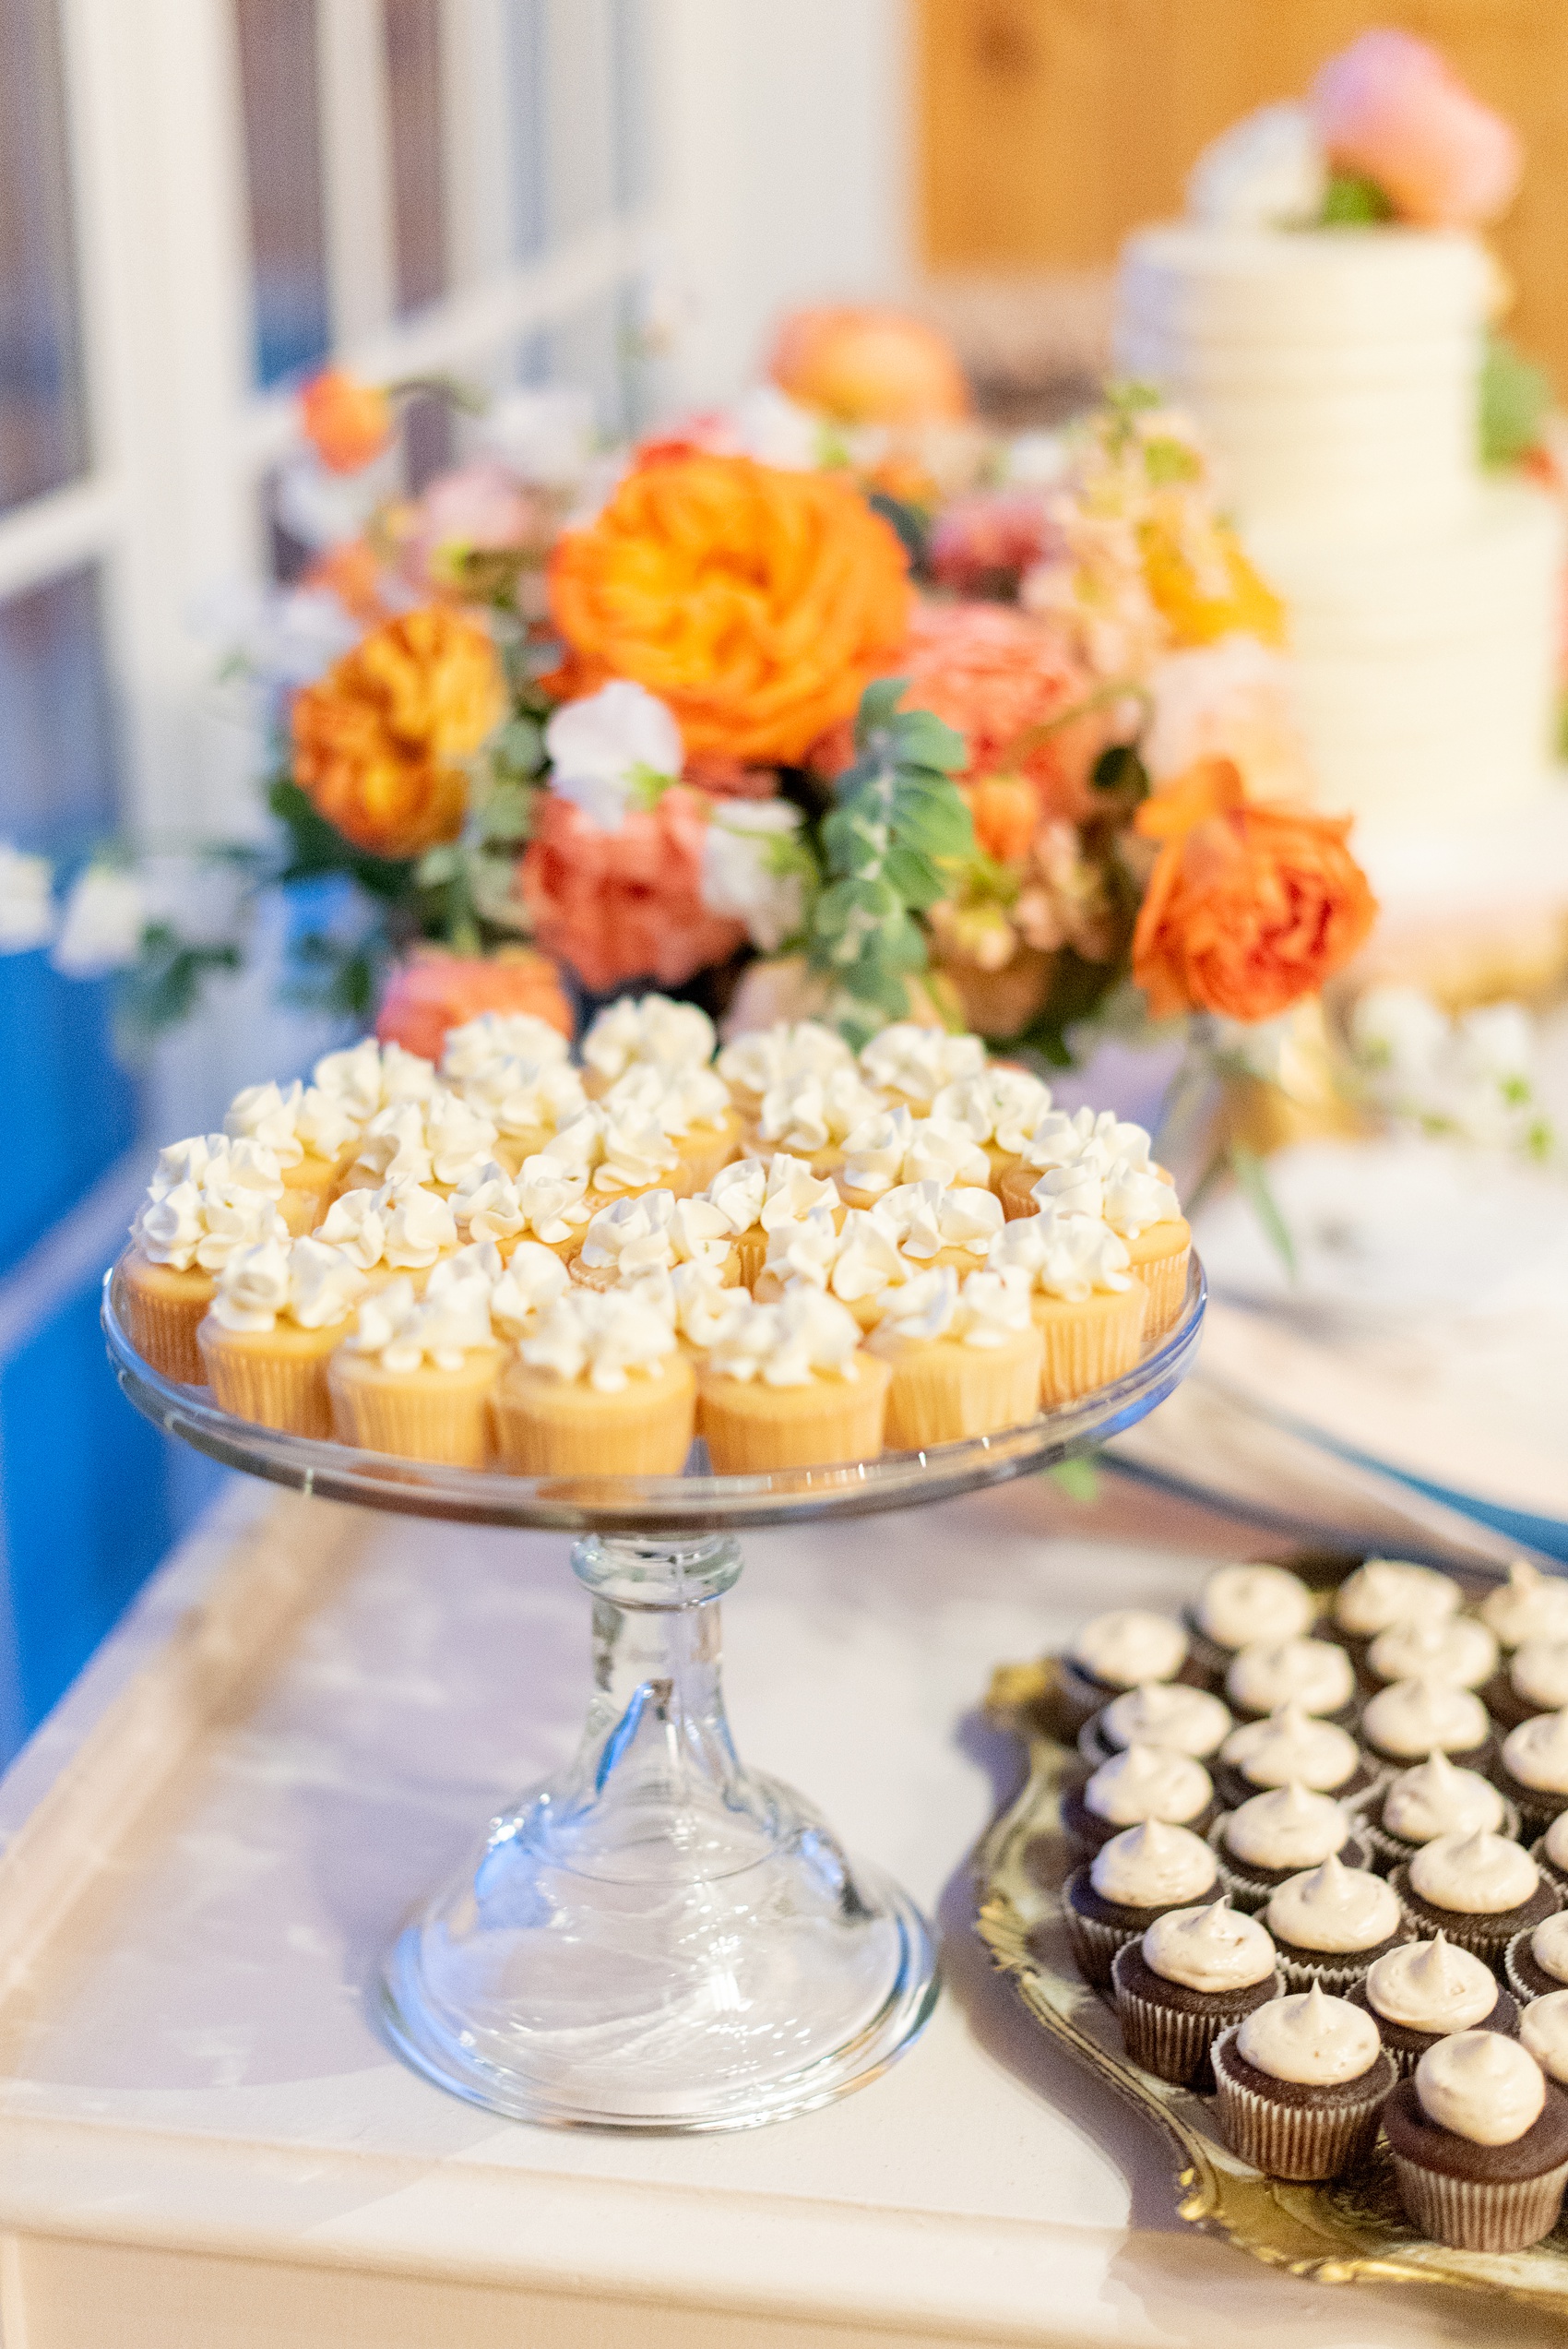 Charlottesville wedding photos by Mikkel Paige Photography. This Virginia venue is perfect for brides and grooms looking for a beautiful farm reception space. It’s green, romantic, and easy to dress up with flowers or keep simple. The dessert table had mini cupcakes, sugar cookies and a simple white buttercream cake decorated with fresh flowers for their sweets. Click through for the complete post from this May event at the Lodge at Mount Ida Farm! Planning and design by Viva L’Event. #Charlottesville #mountidafarm #lodgeatmountida #CharlottesvilleVA #CharlottesvilleVirginia #Charlottesvillewedding #meristemfloral #Charlottesvilleweddingphotographer #mikkelpaige #desserttable #rusticdesserttable #passionflowercakes